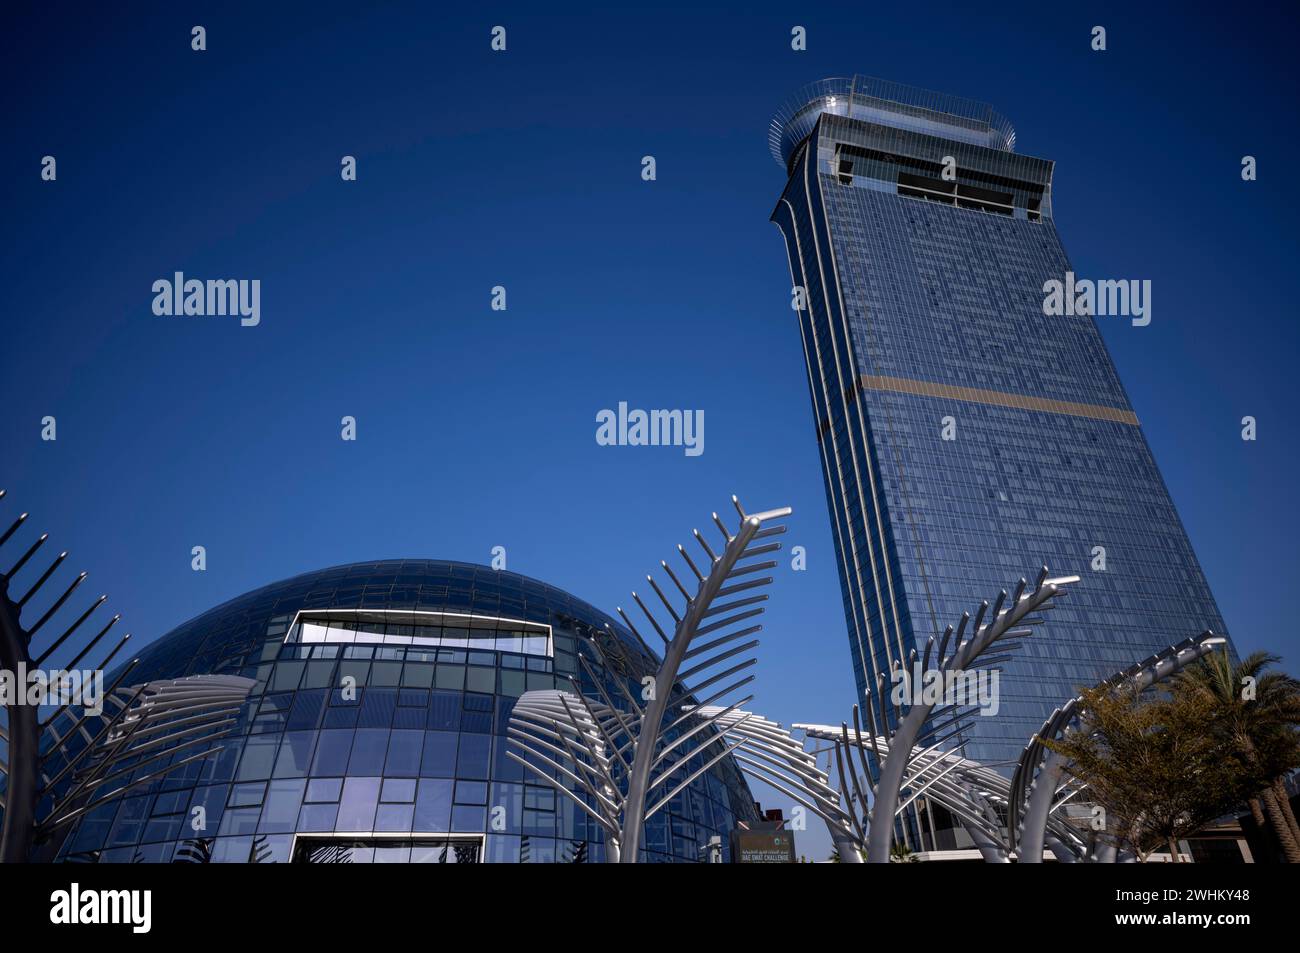 Artificial palm trees made of steel, Hotel St. Regis The Palm with viewing platform The View At The Palm, Palm Jumeirah, Dubai, United Arab Emirates Stock Photo